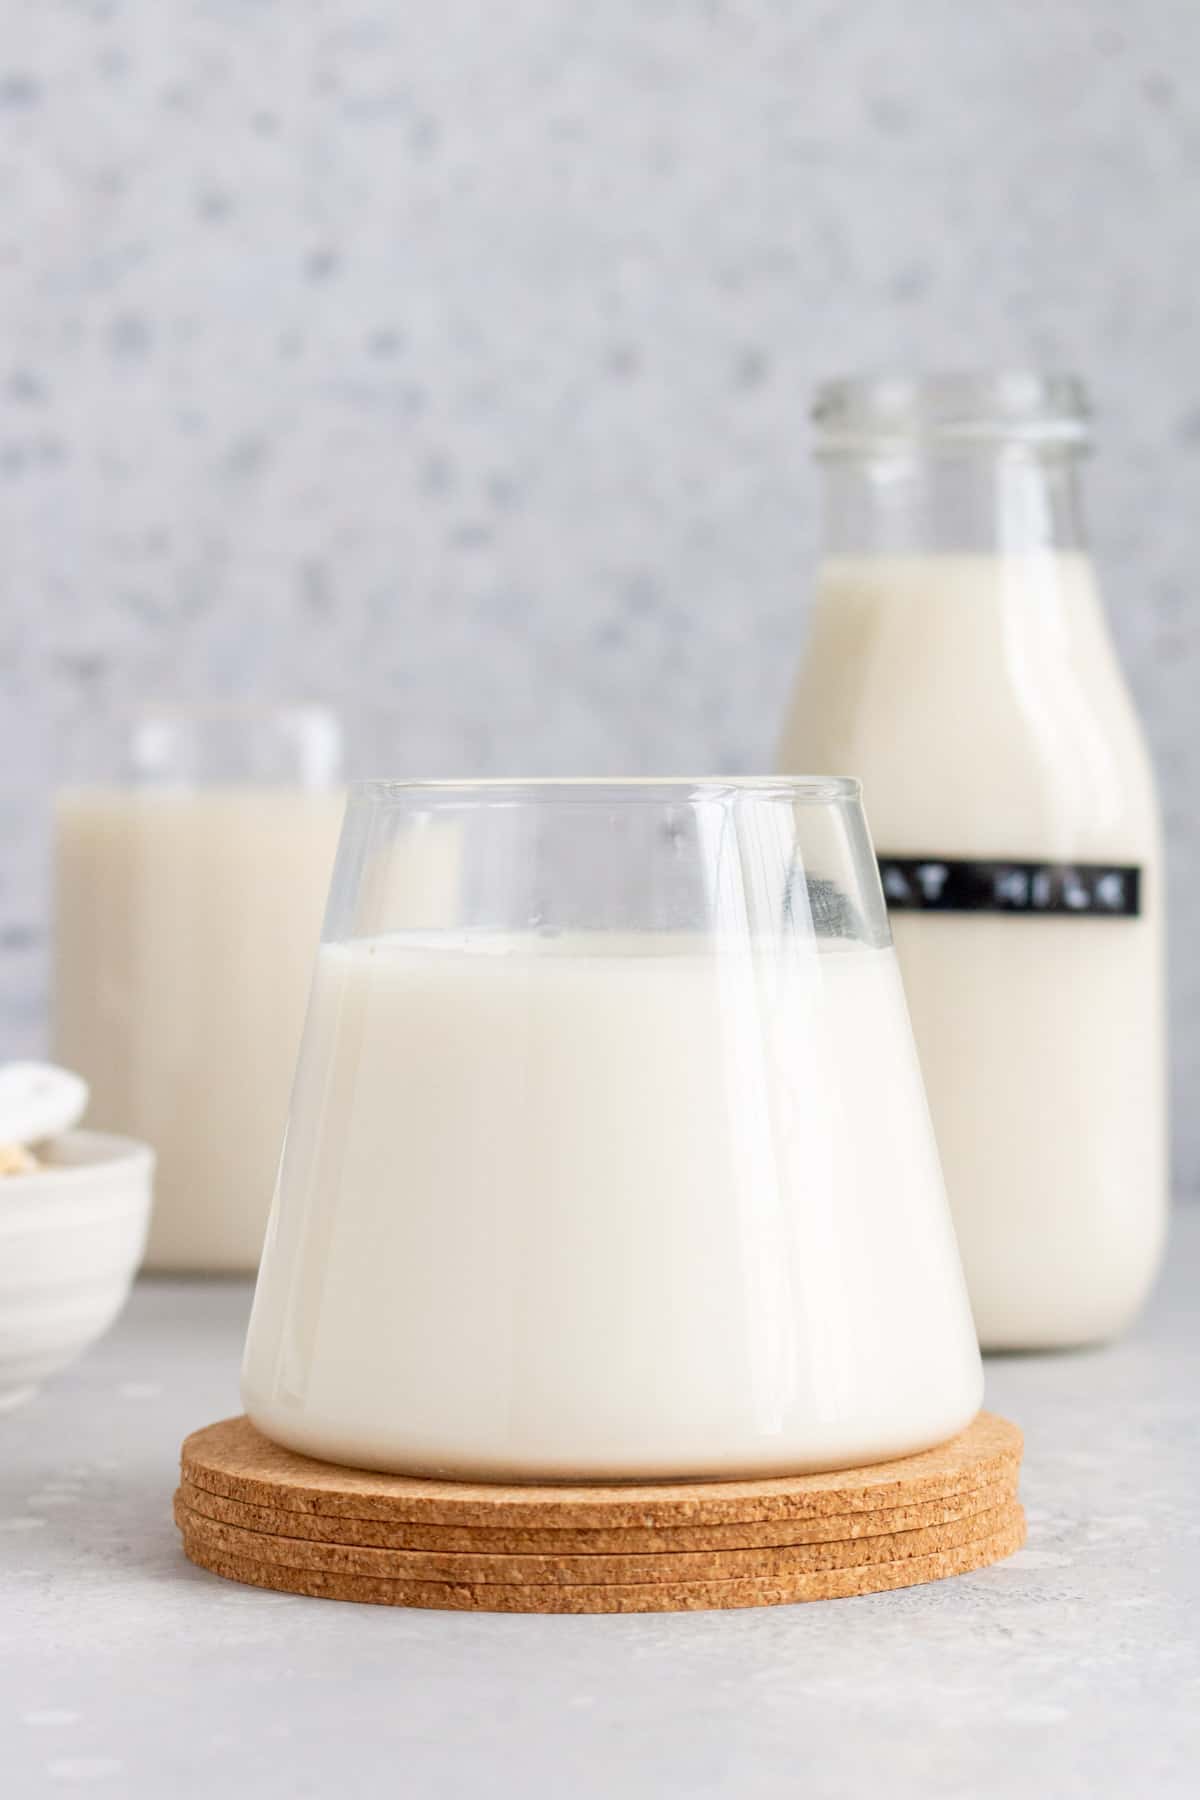 Profile view of a glass of oat milk with a bottle in the background.